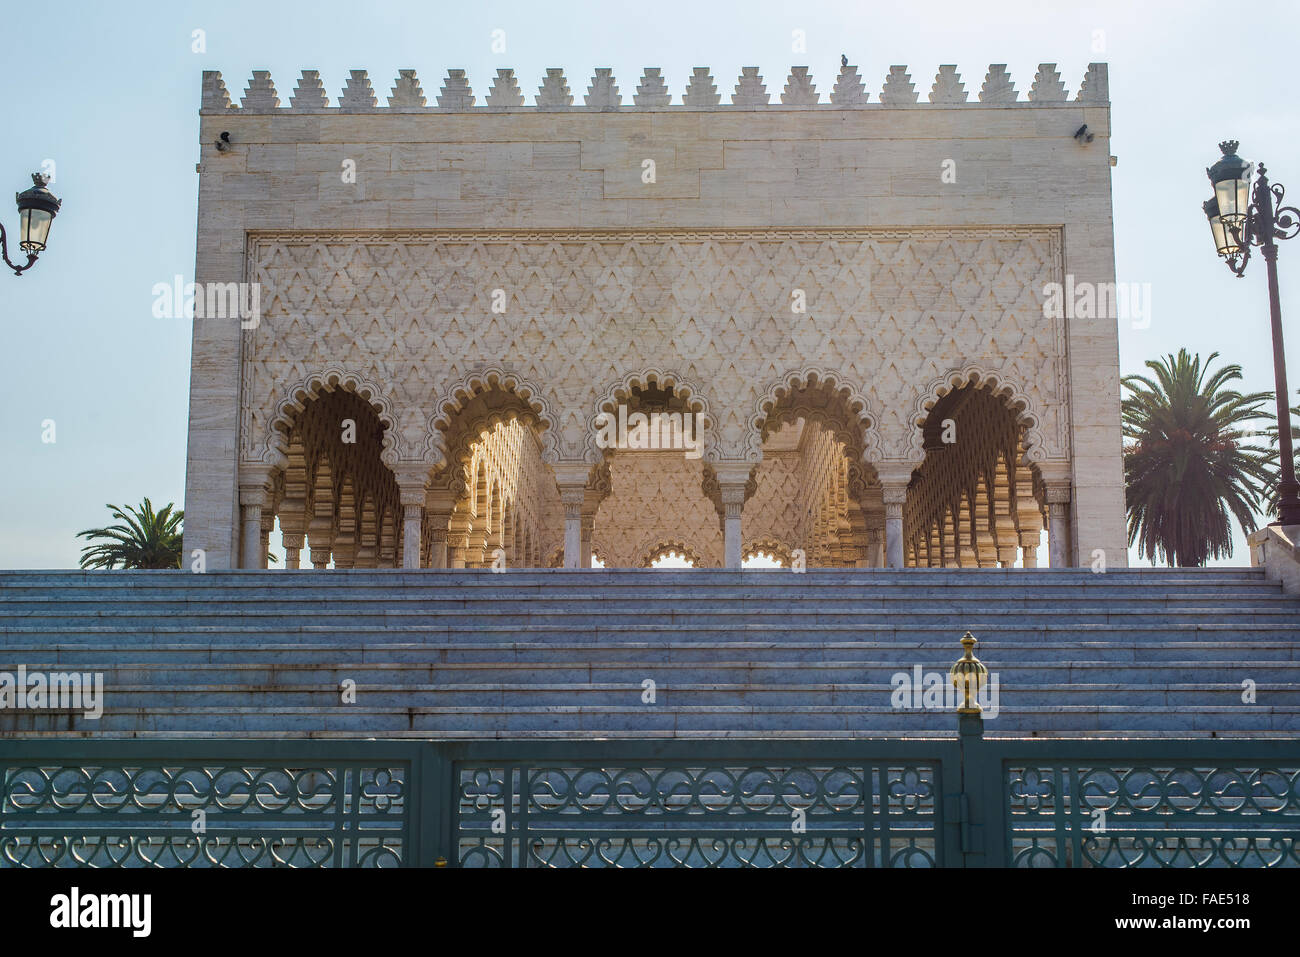 Mausoleum of Mohammed V in Rabat, Morocco. Contains tombs of Kings Mohammed V, Hassan II and Prince Mulay Abdallah. Stock Photo